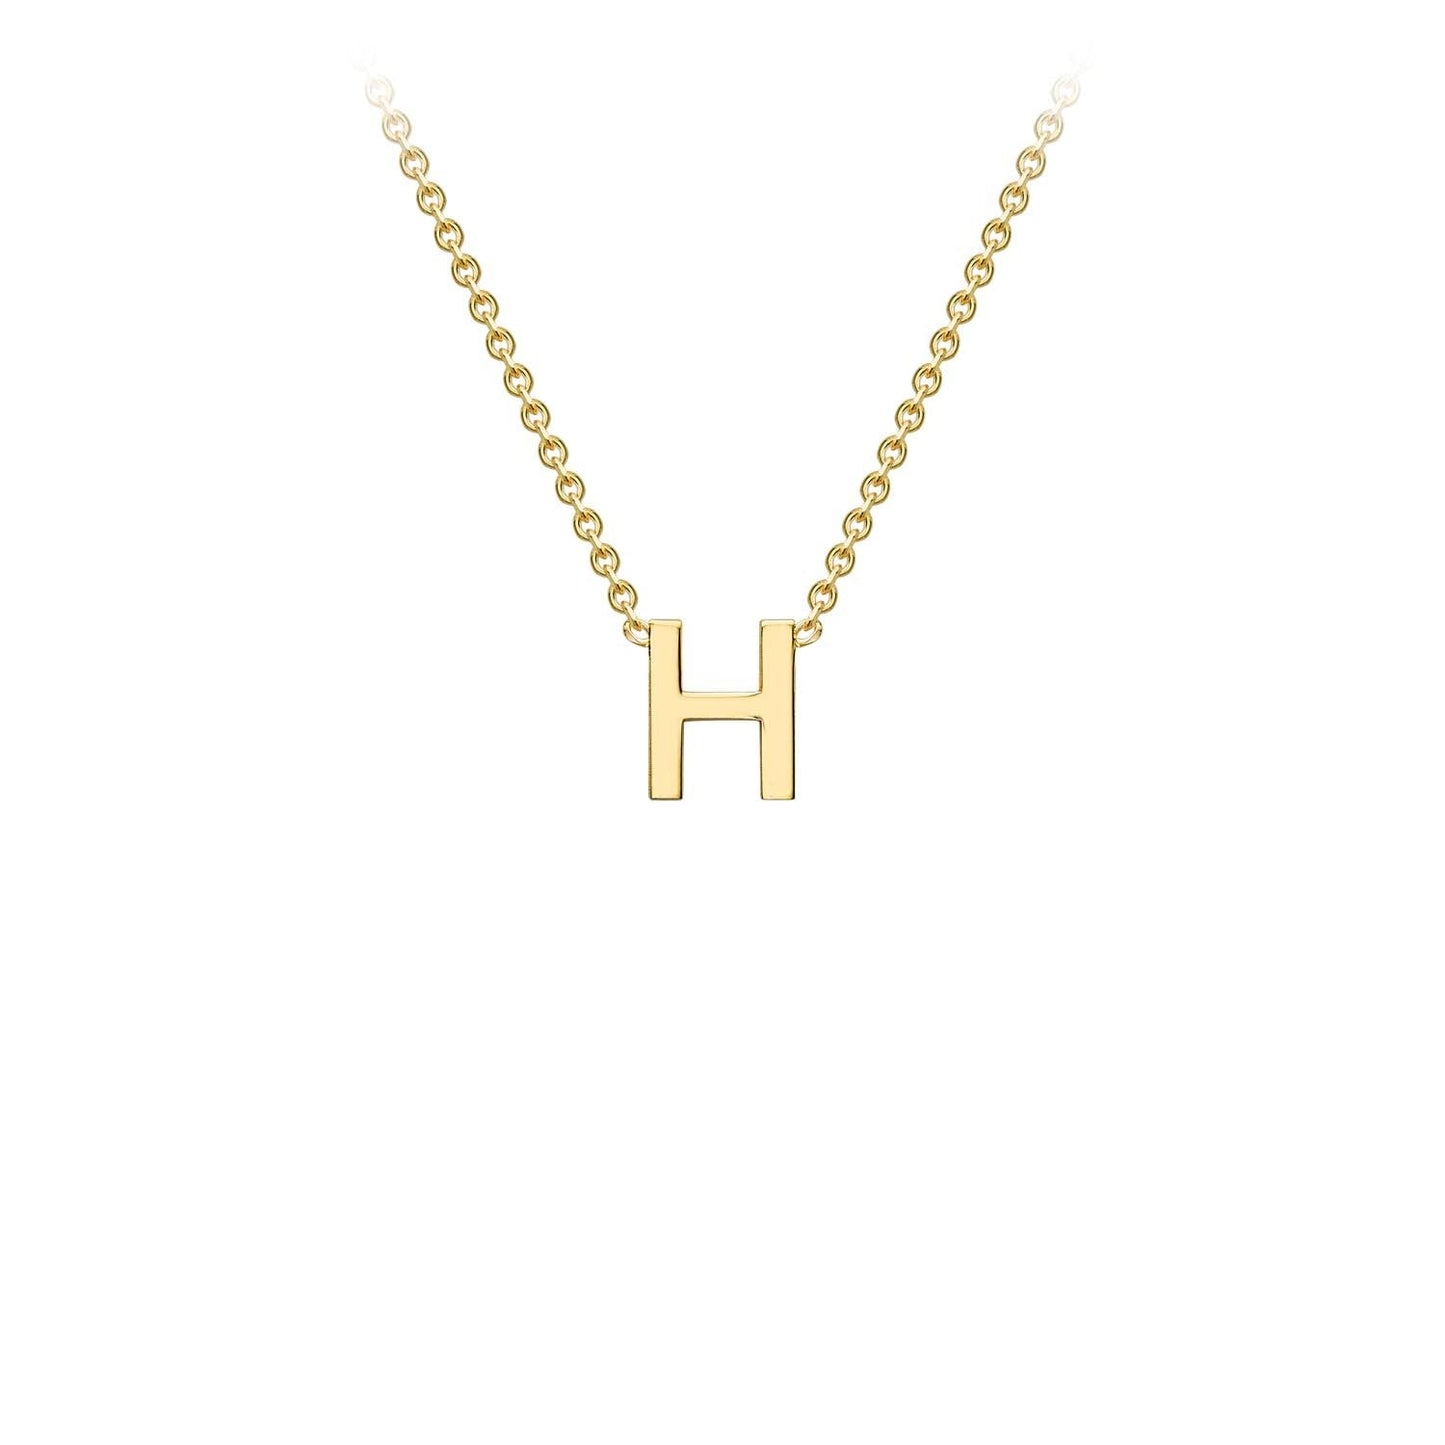 9K Yellow Gold 'H' Initial Adjustable Letter Necklace 38/43cm